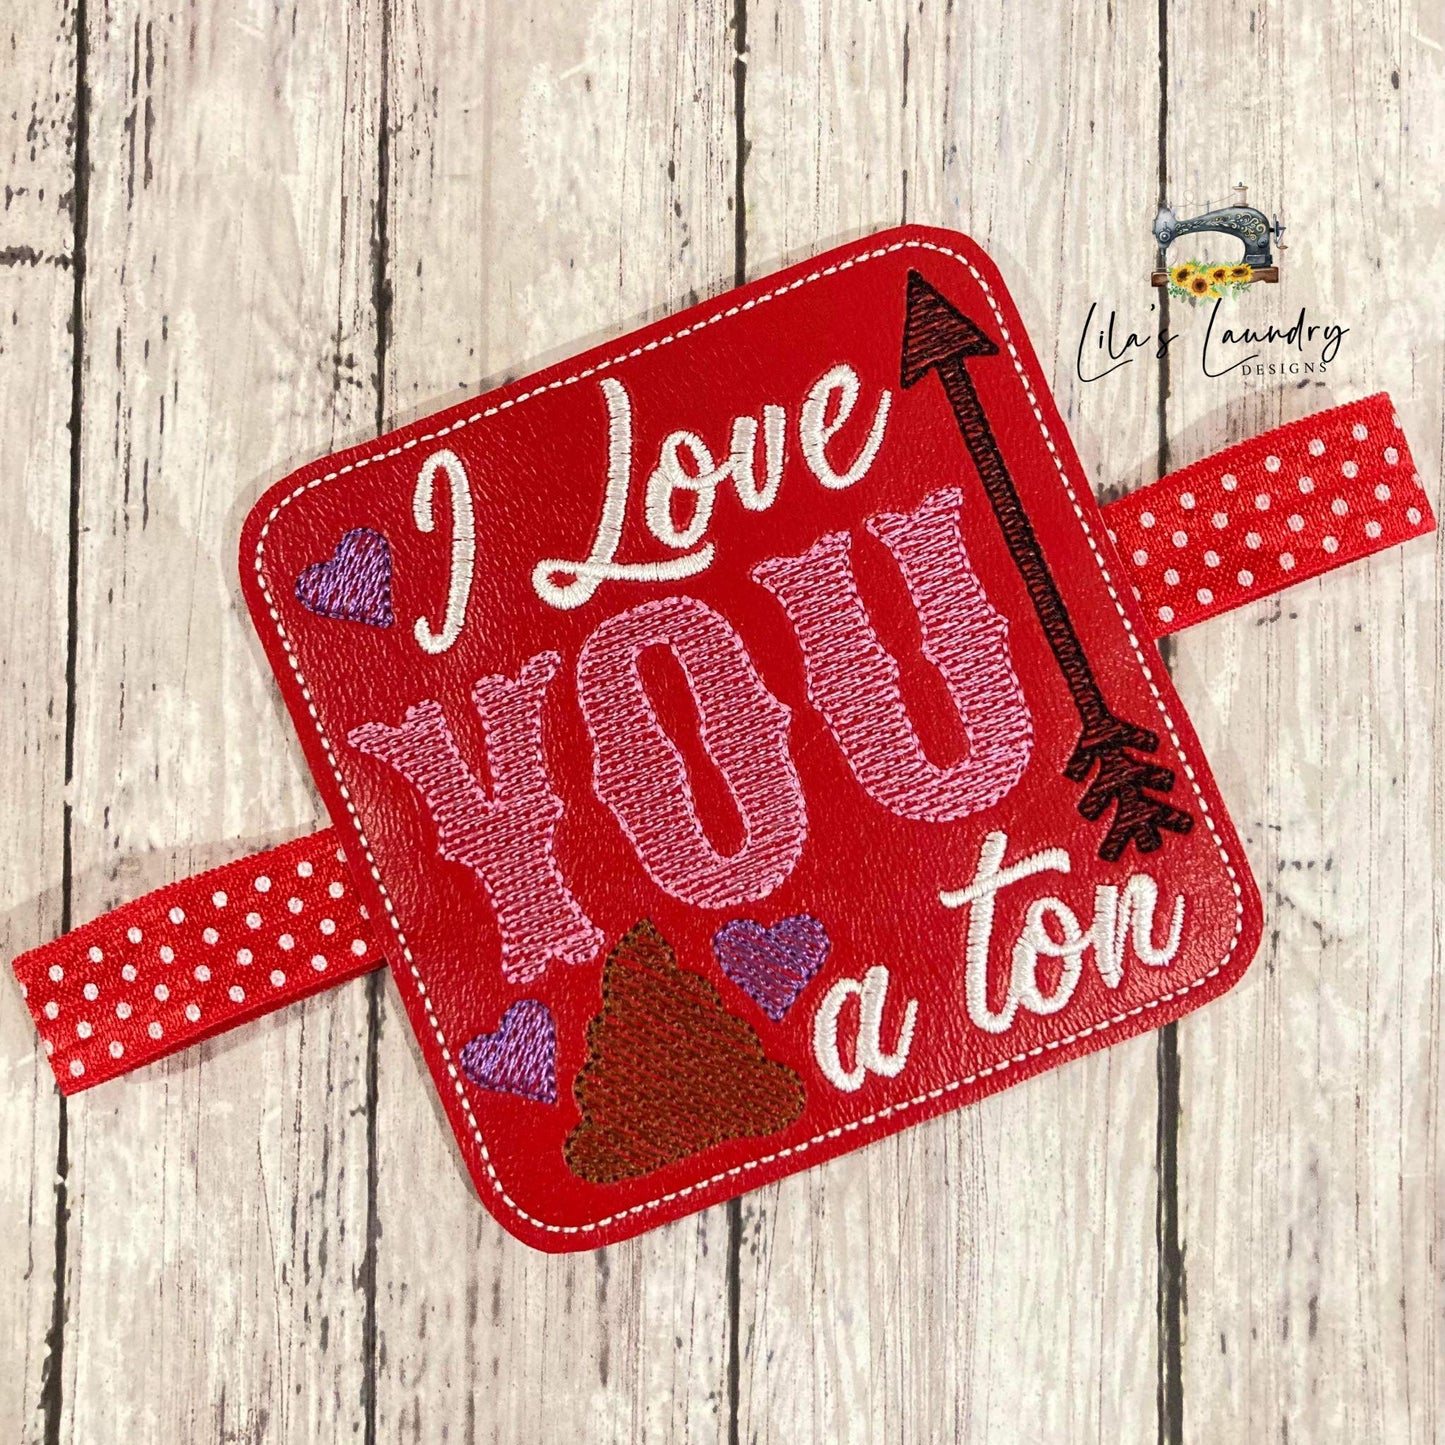 Love You a Ton  - TP tie 4x4 - DIGITAL Embroidery DESIGN